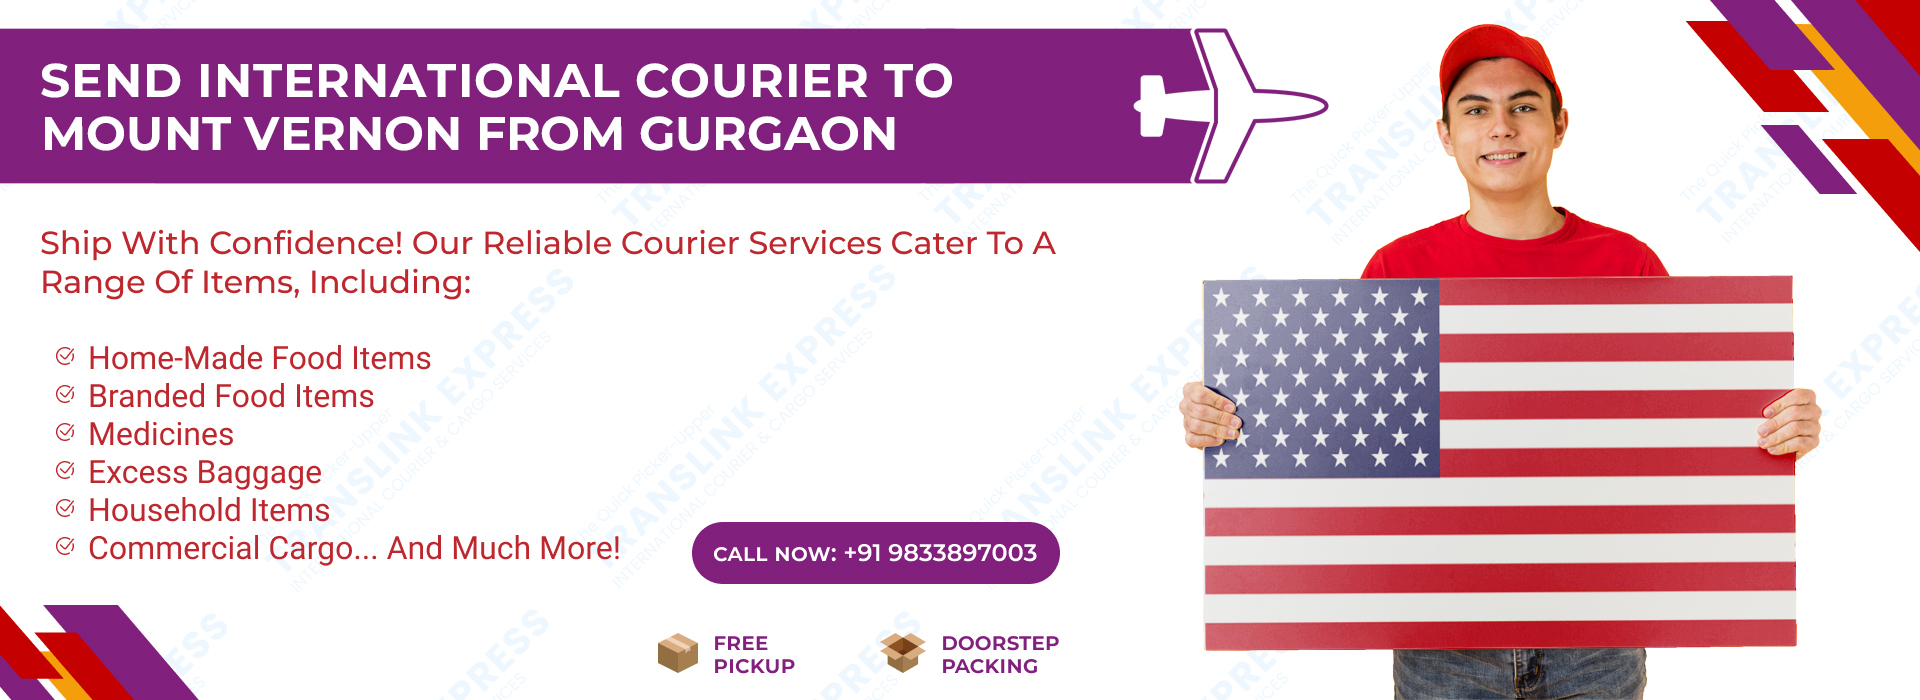 Courier to Mount Vernon From Gurgaon